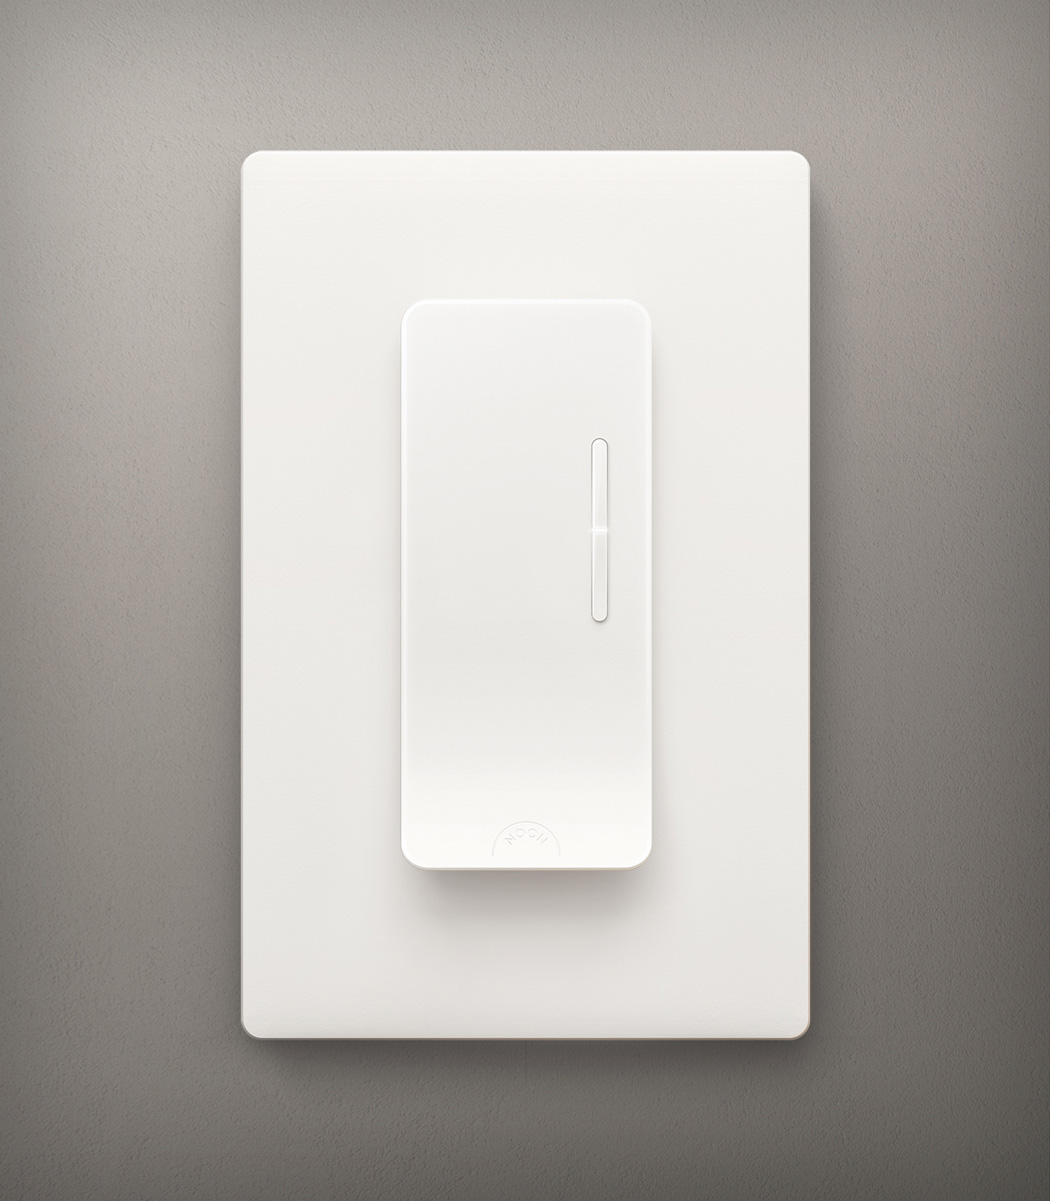 noon_home_switch_08